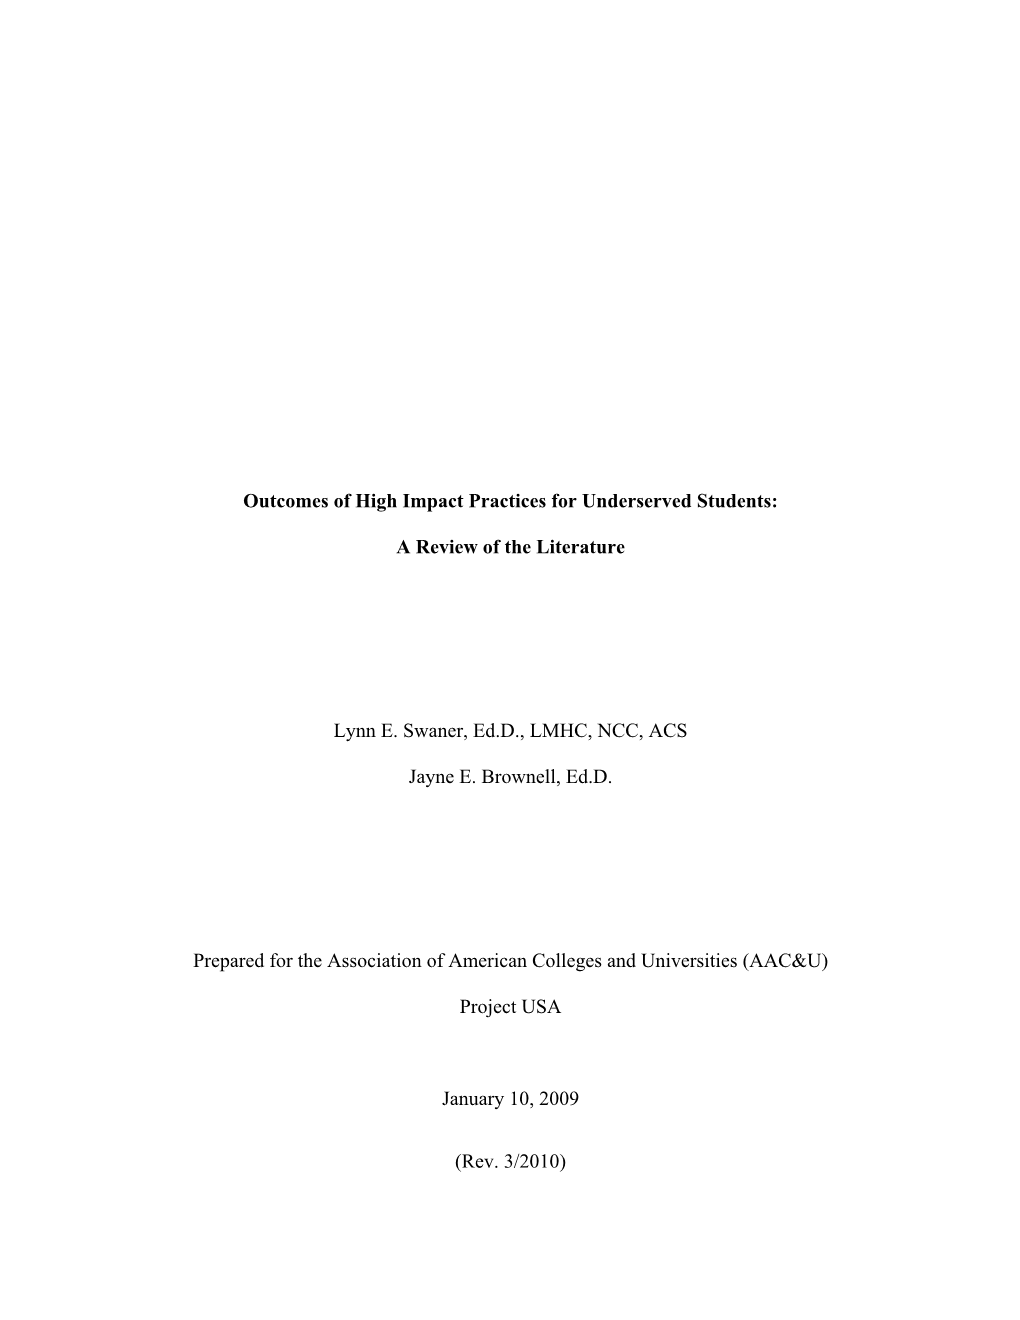 Outcomes of High Impact Practices for Underserved Students: a Review of the Literature Lynn E. Swaner, Ed.D., LMHC, NCC, ACS